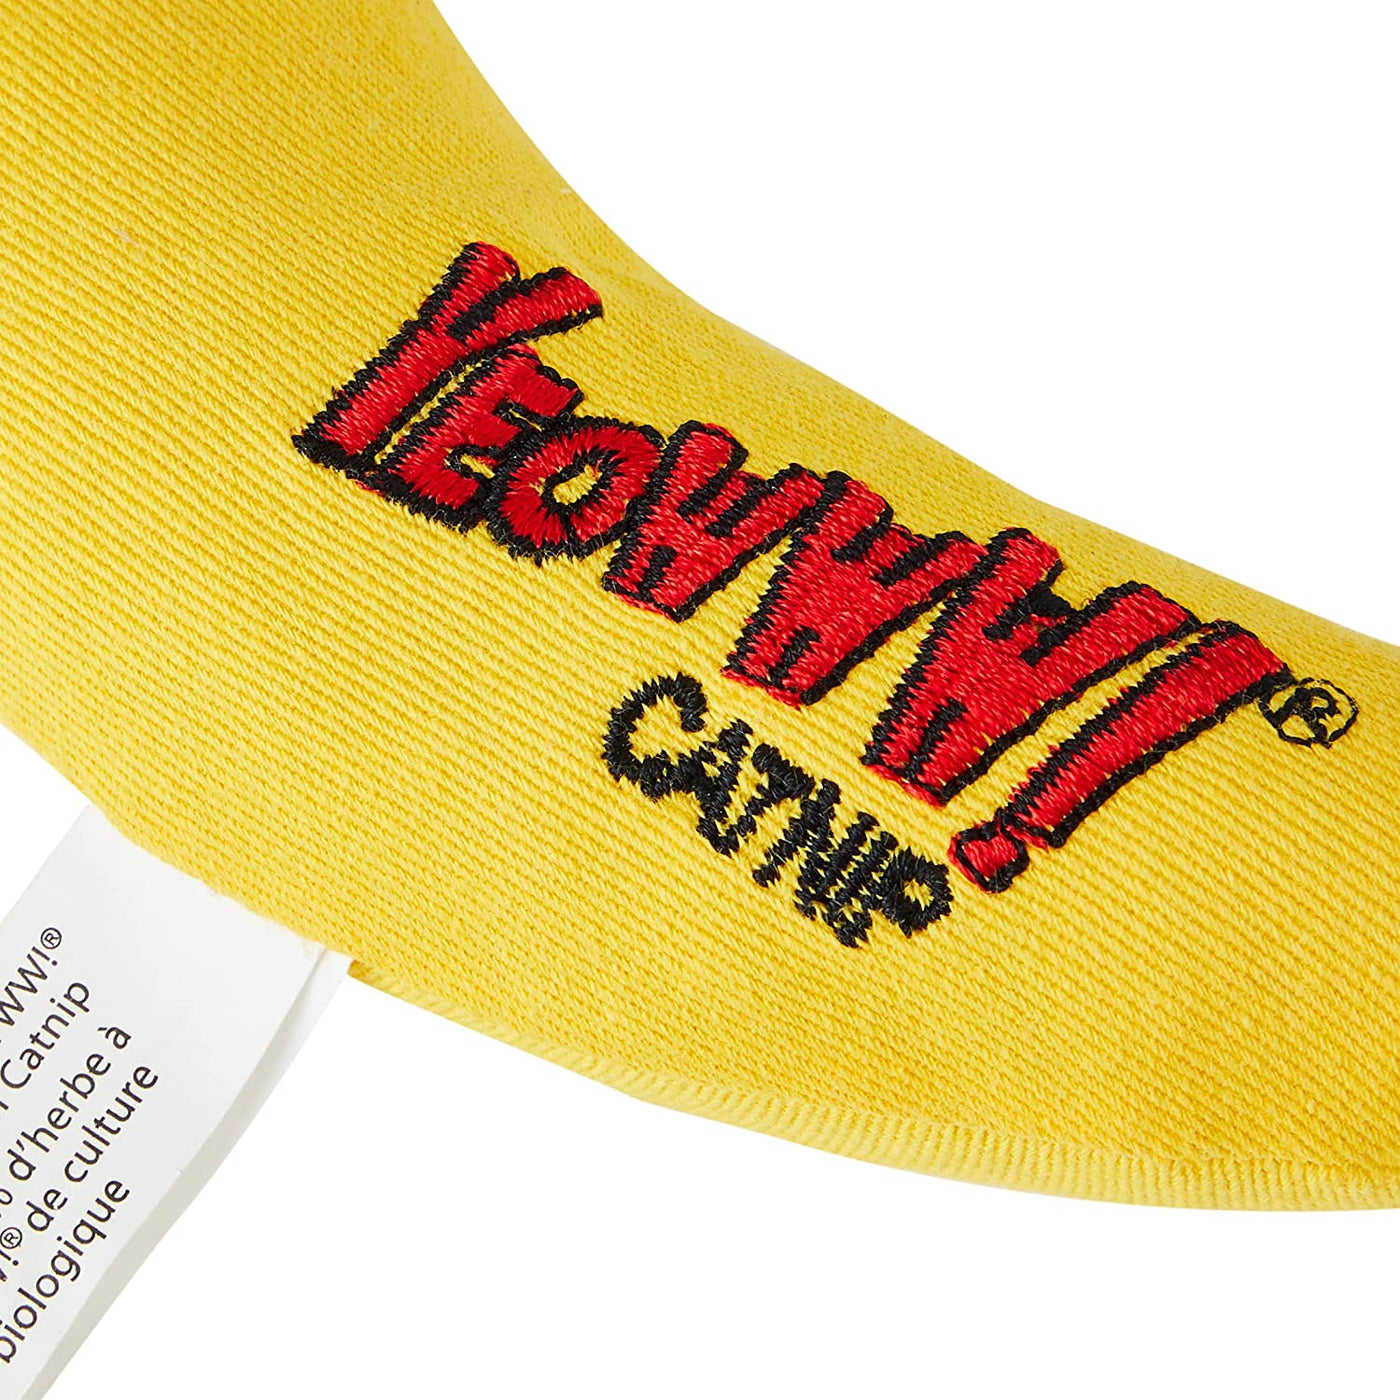 Yeowww! Bananas Cat Toy with Pure American Catnip